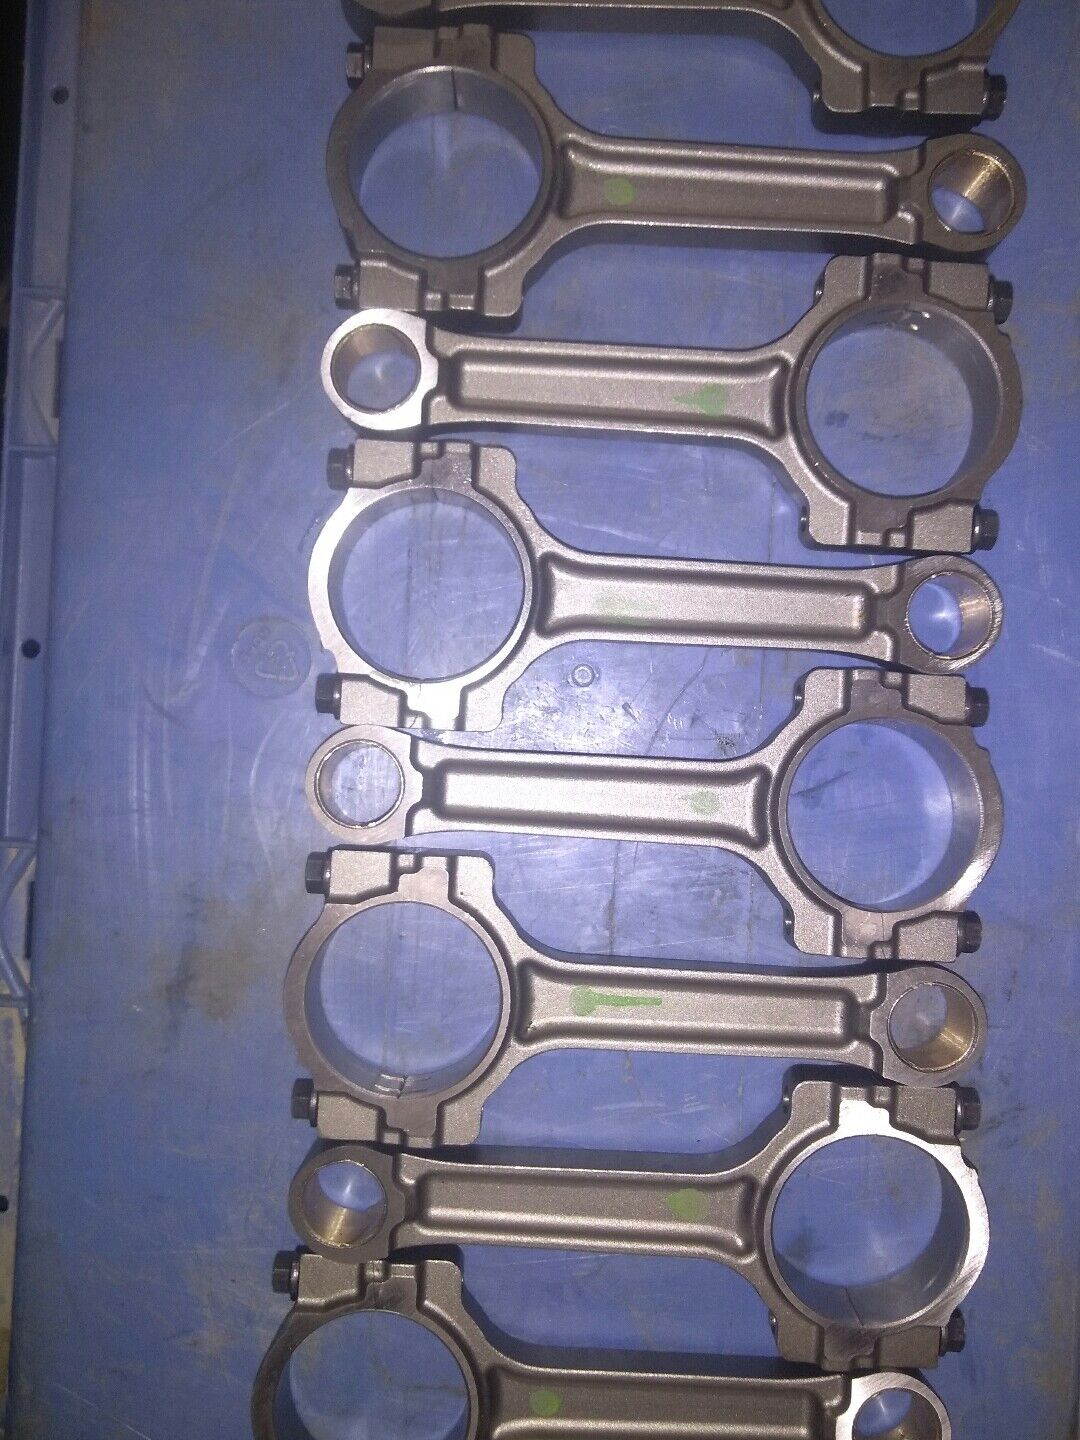  Reconditioned LS2 LS3 floating pin connecting rods 5.3 6.0 6.2 set of 8 rods